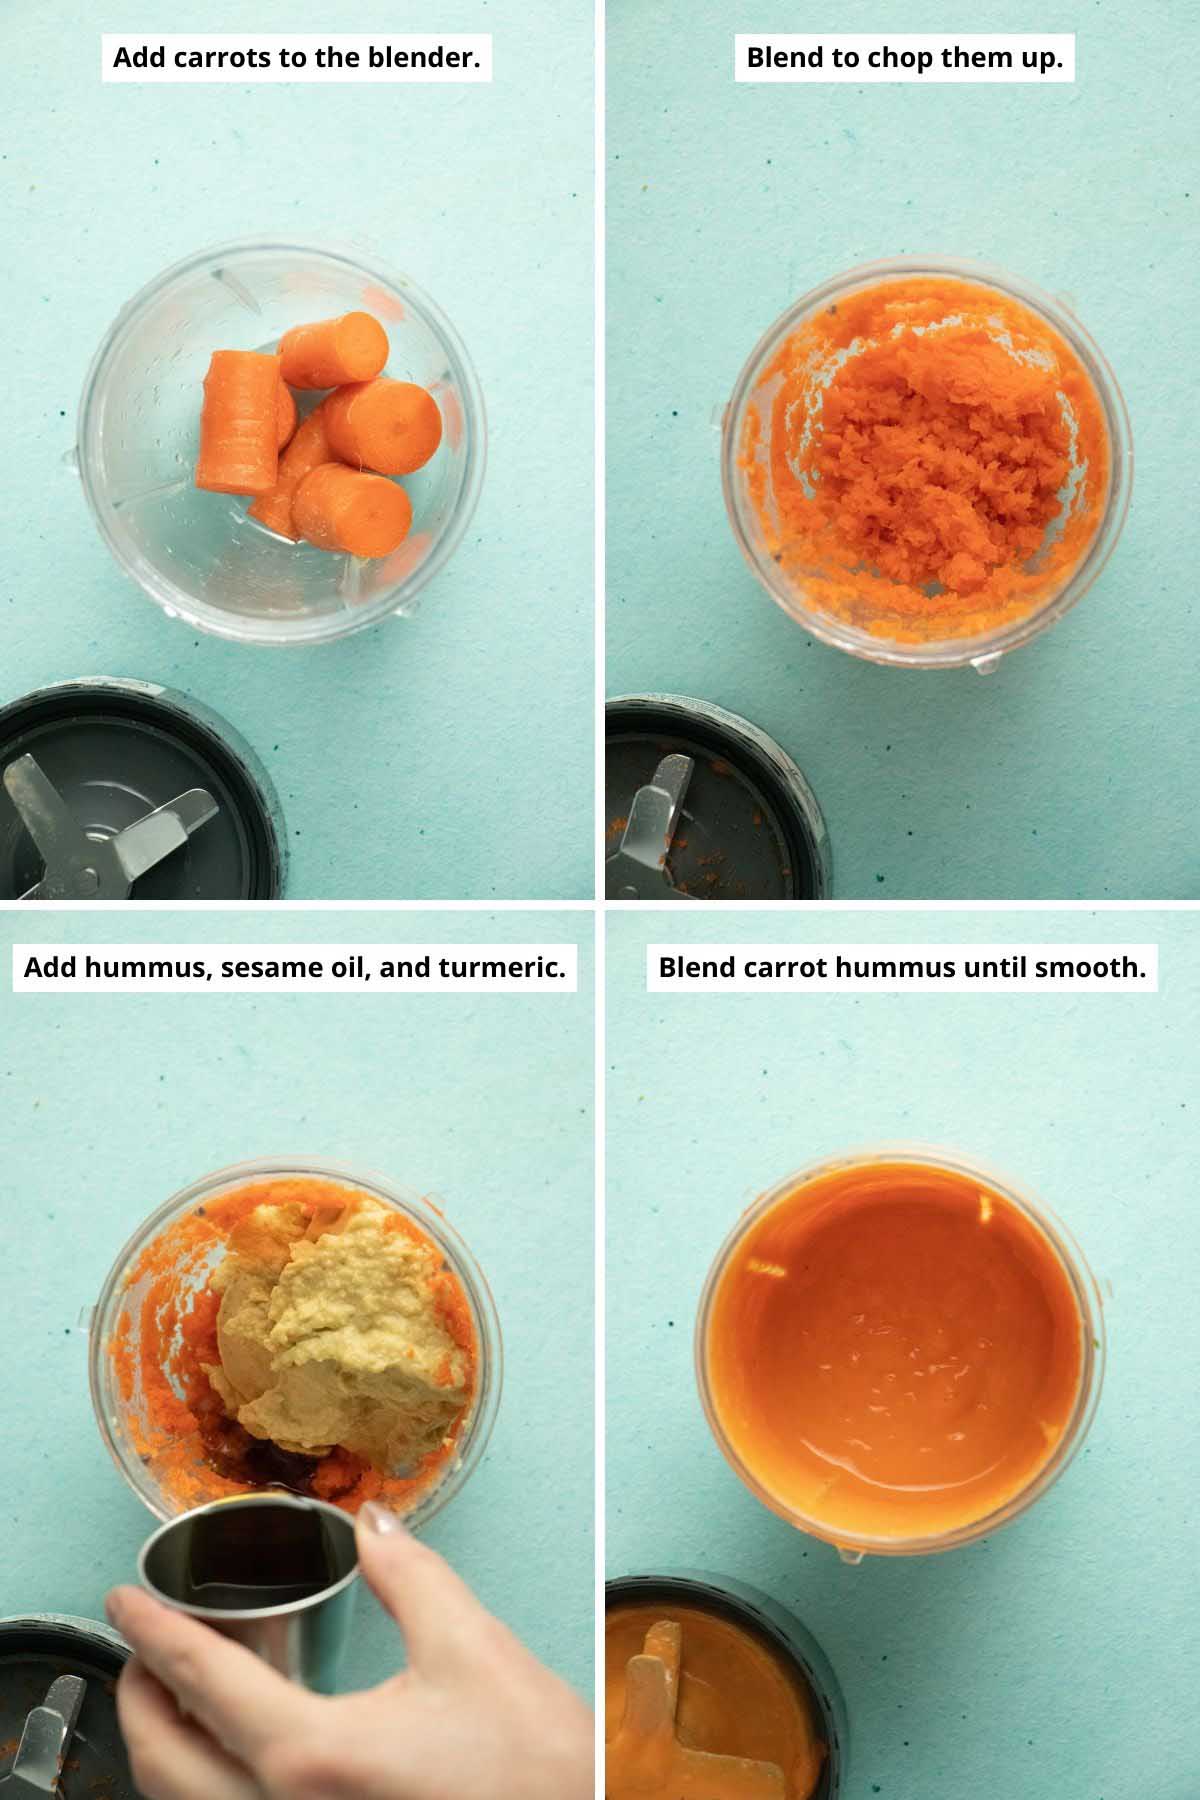 image collage showing carrots in the blender before and after blending, adding hummus and spices, and the carrot hummus after blending